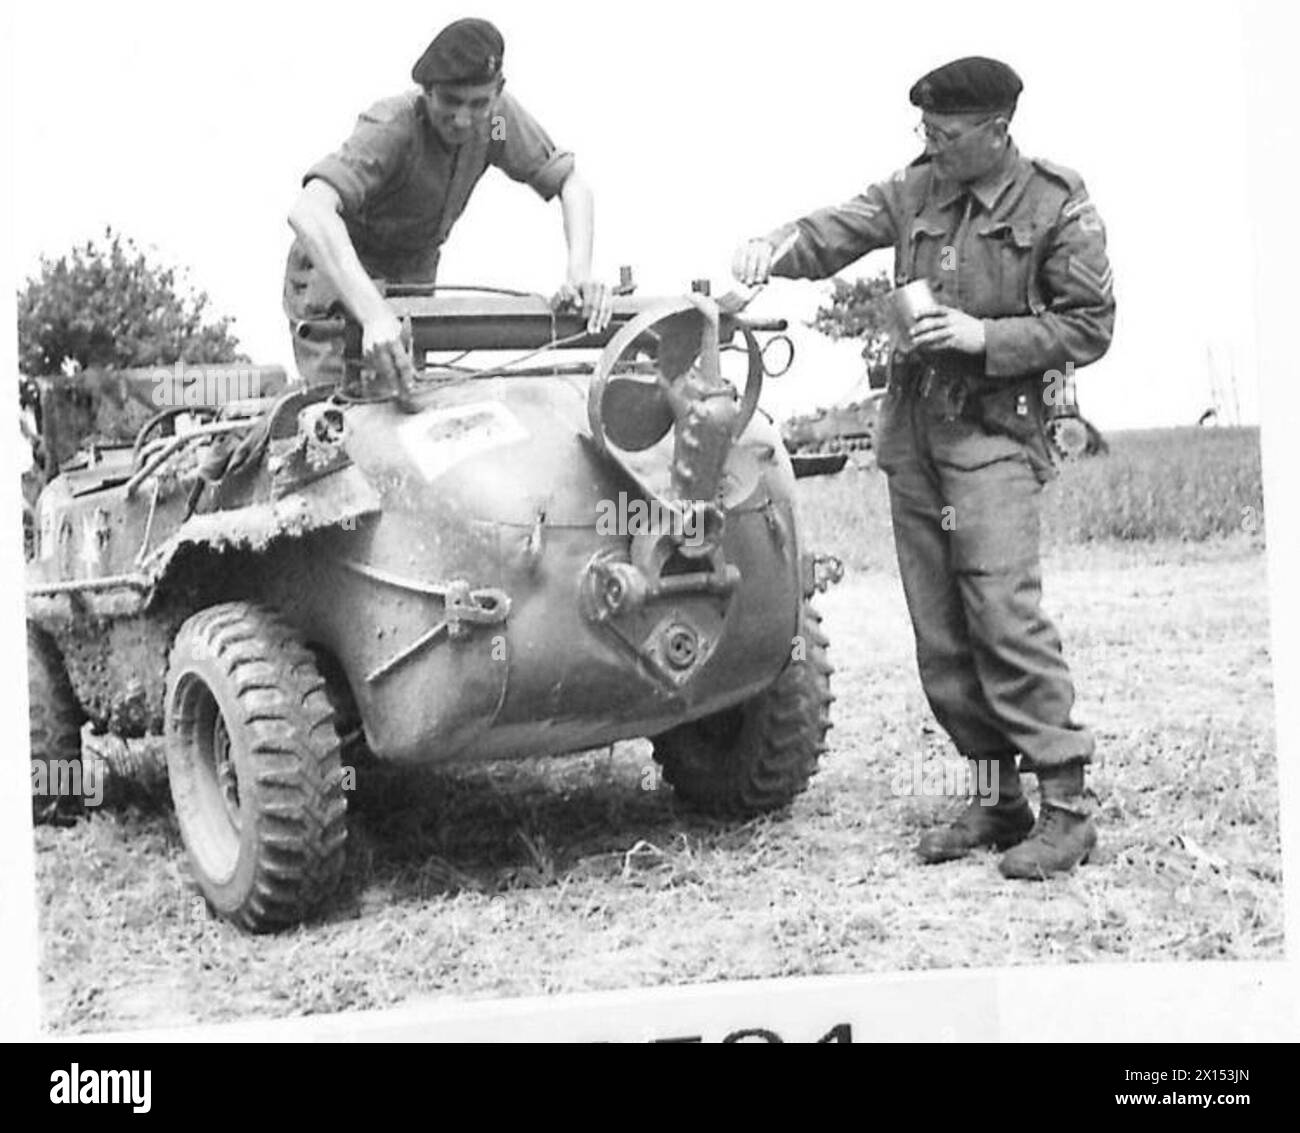 THE PEOPLES' CAR - An amphibious VOLKSKRAFTWAGEN captured by a British armoured unit from the 12th SS Panzer Division (Hitler Youth) in the fighting near Cheux has been repainted and is now being used by the regiment. 11th Armoured Division, 23rd Hussars British Army, 21st Army Group Stock Photo